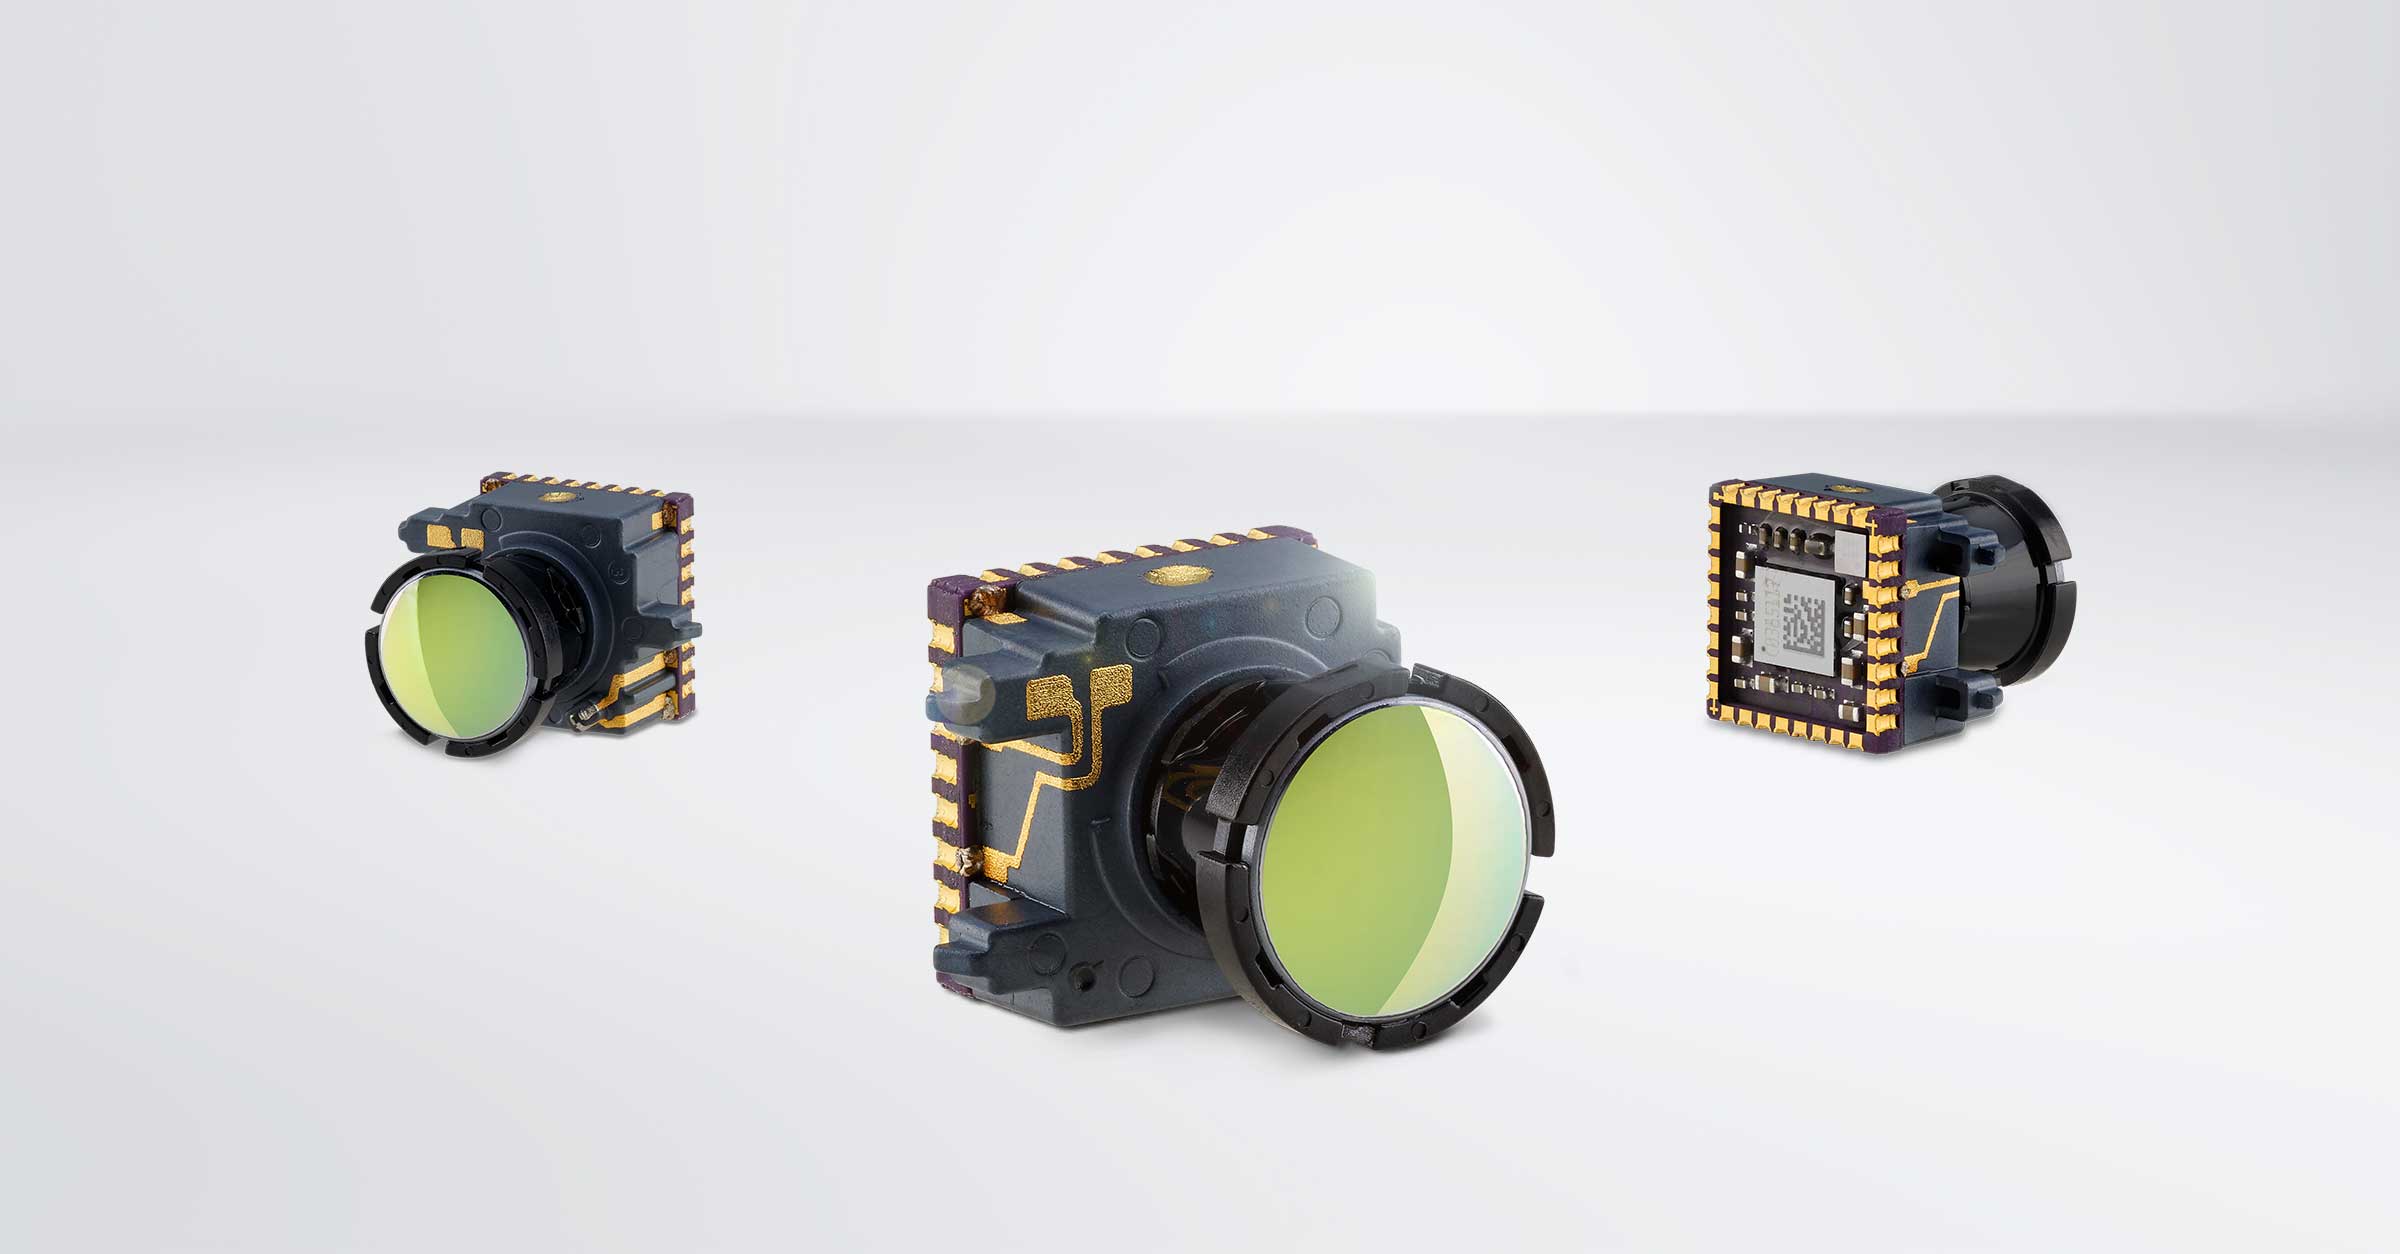 Lepton UW Represents the Widest Field of View Available for a Micro-Thermal Camera Module